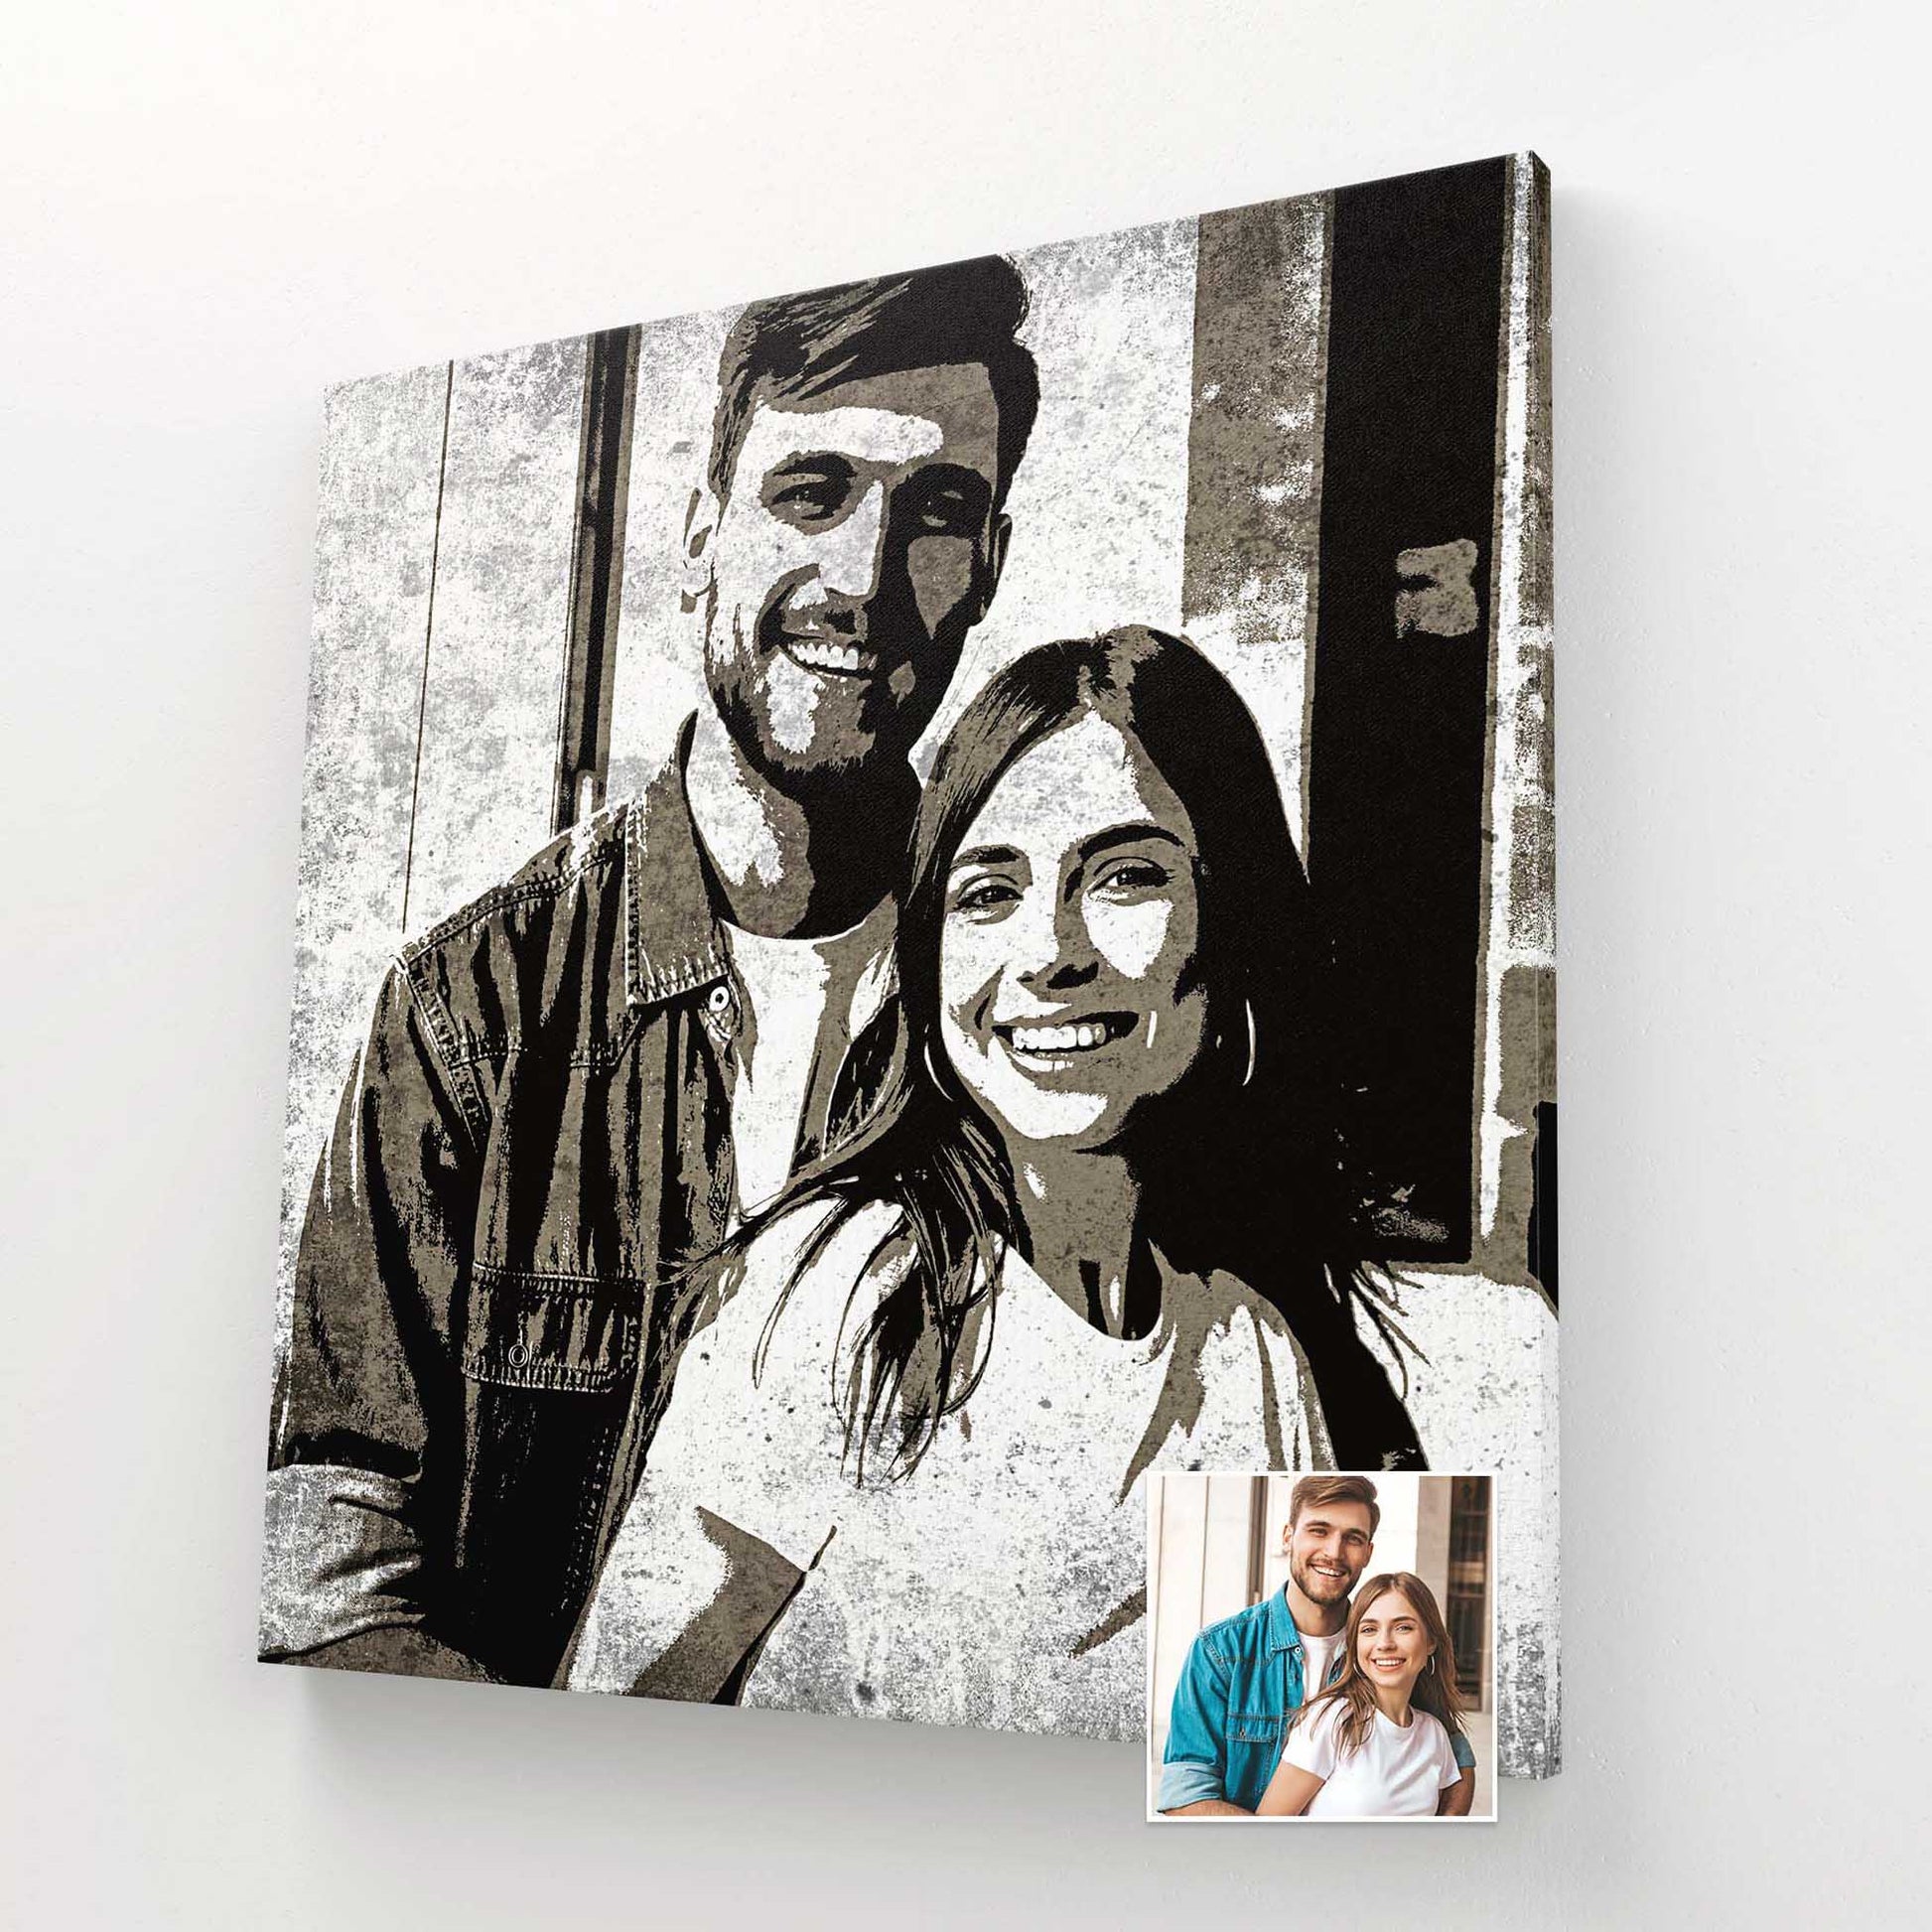 Capture the essence of urban culture with our Personalised Black & White Urban Street Art Canvas. Each piece is meticulously crafted, transforming your photo into a minimalist work of art